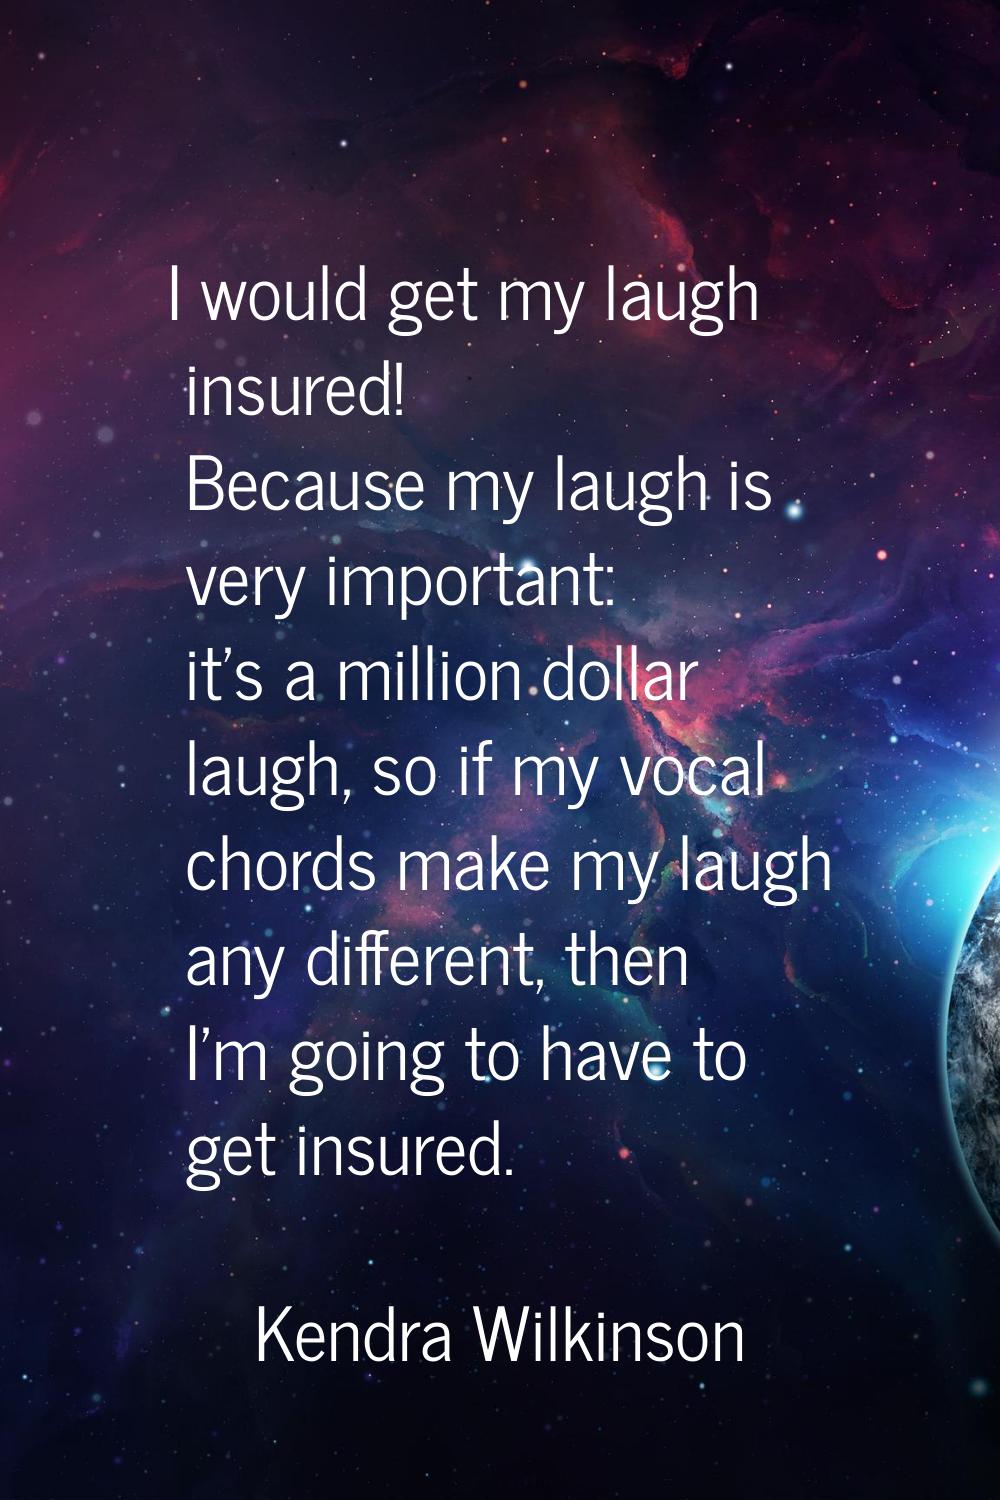 I would get my laugh insured! Because my laugh is very important: it's a million dollar laugh, so i